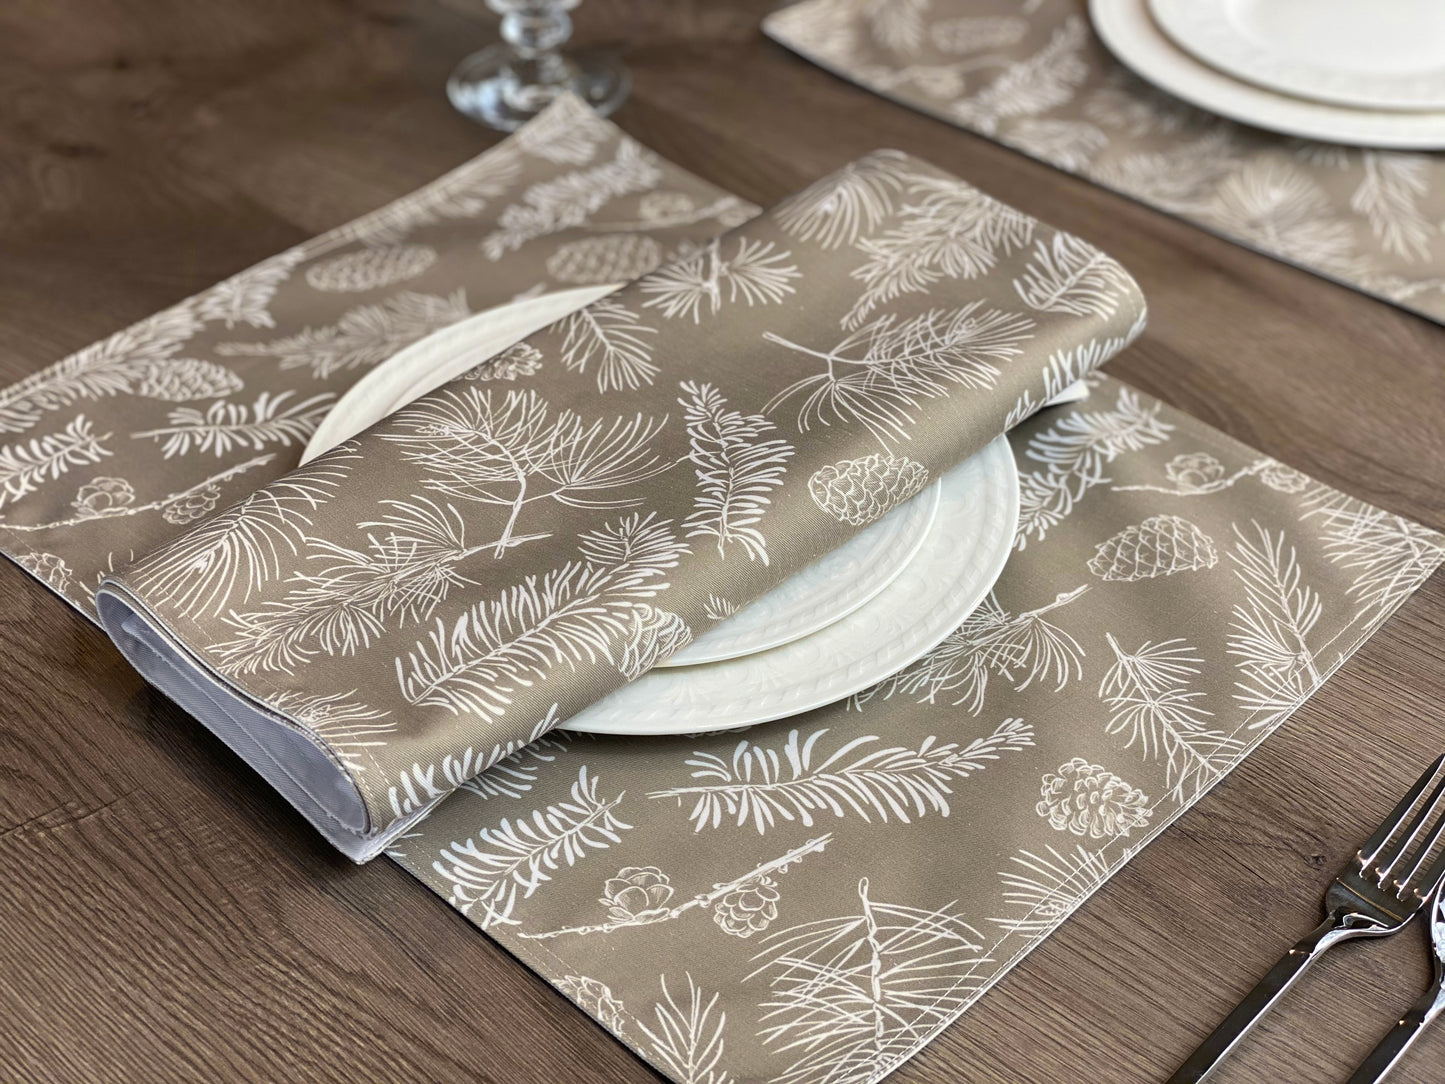 Set of 4 Autumn Fir branch Placemat, winter fall pine corns and fir branches Printed washable Placemat for fall dining table.14" x 19"